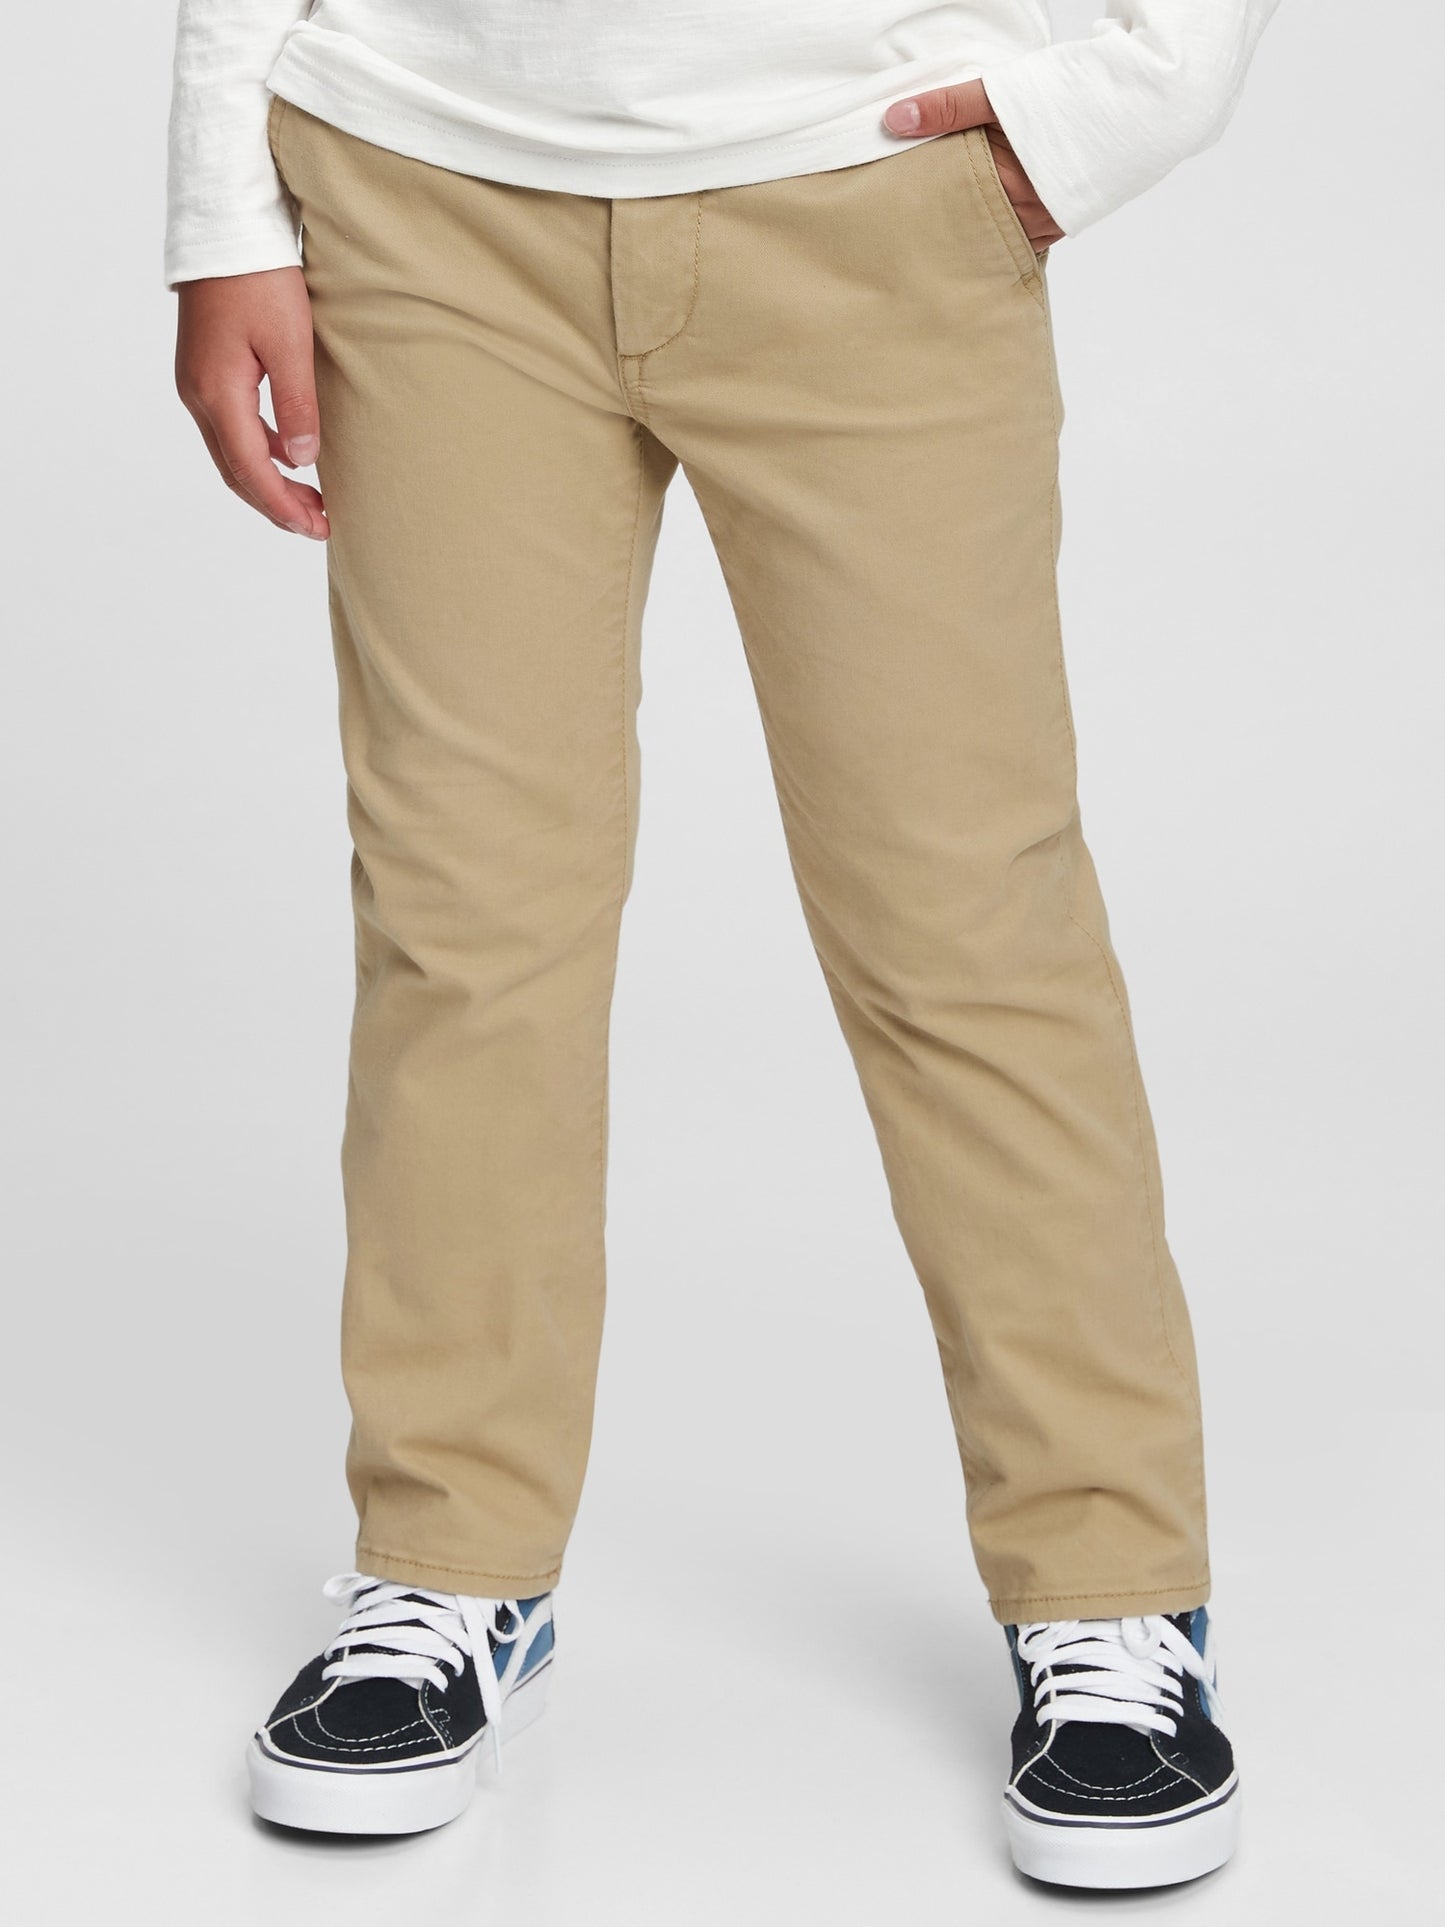 Gap Kids Uniform Lived -In Khakis With Washwell  - New British Khaki